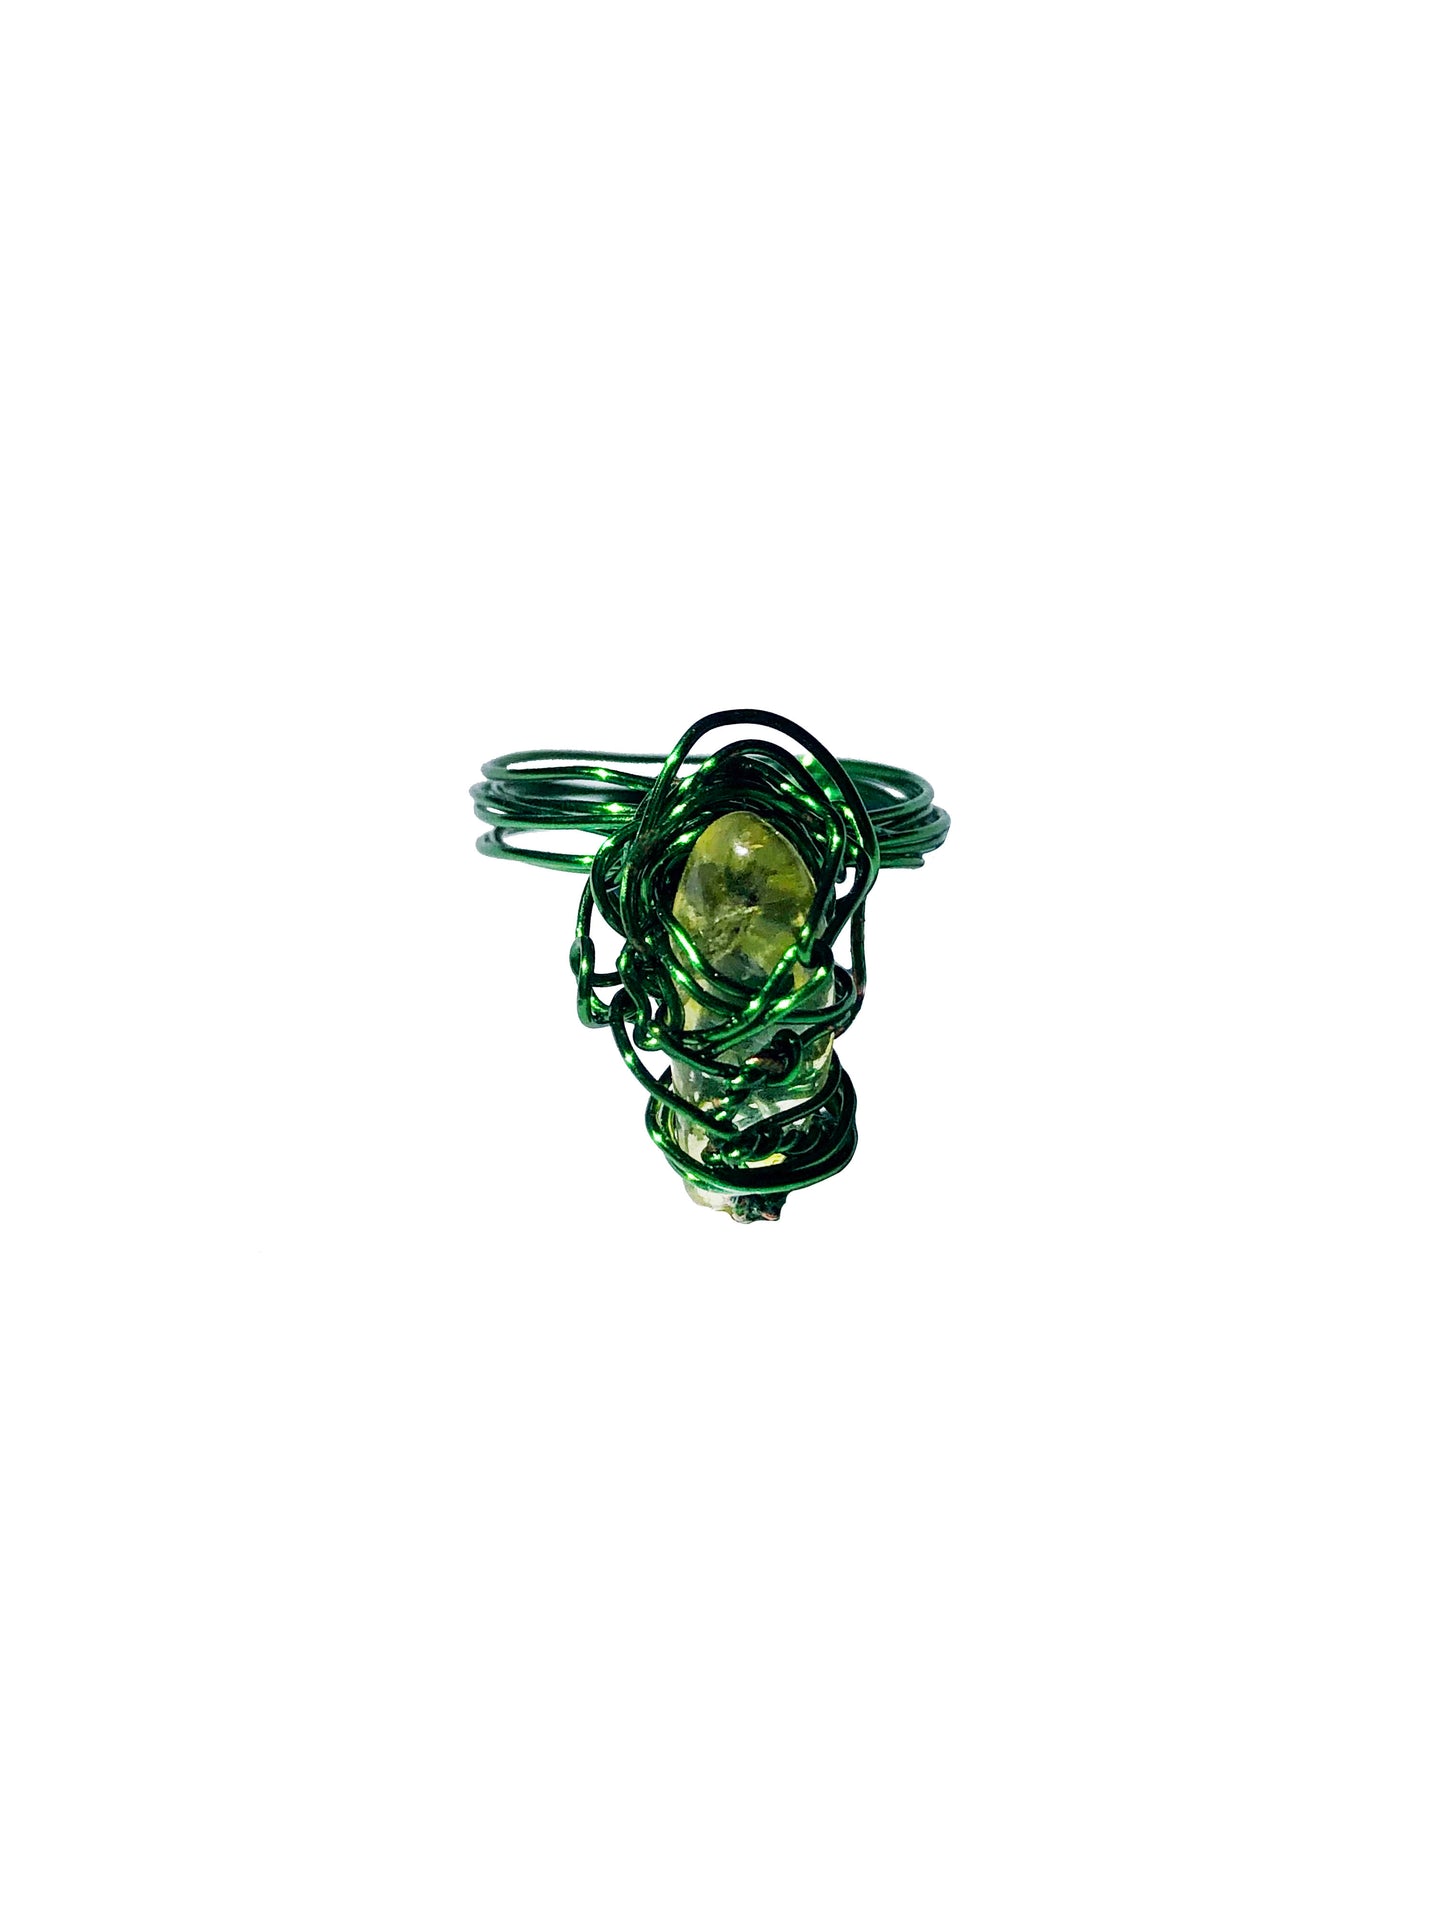 handmade green wire wrapped tourmaline stone ring 